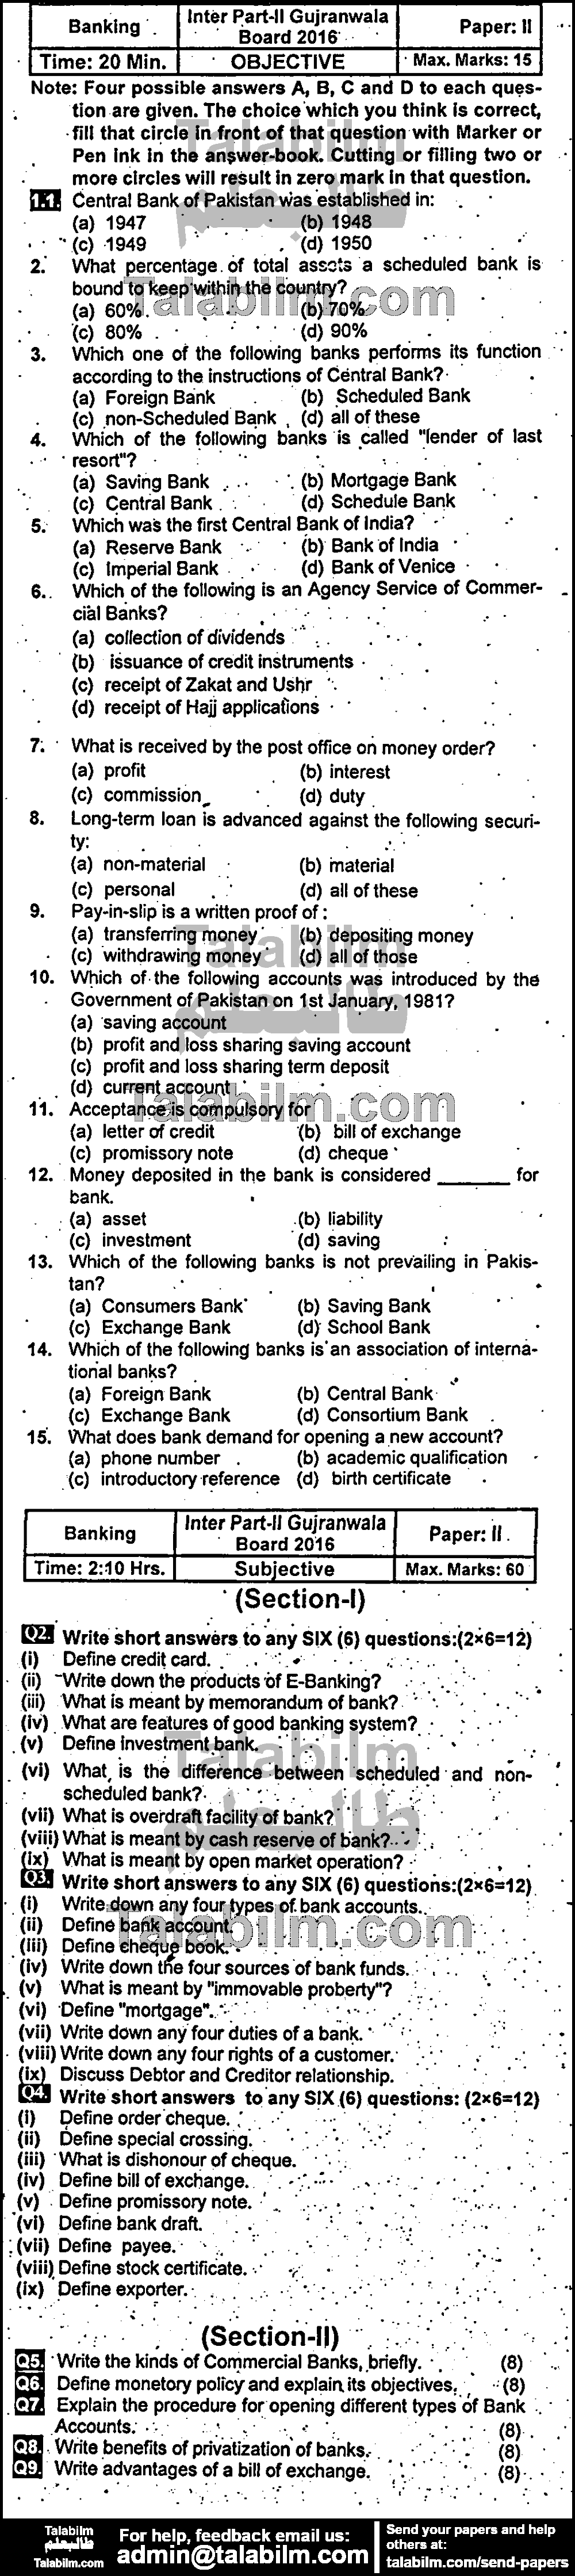 Principles of Banking 0 past paper for Group-I 2016